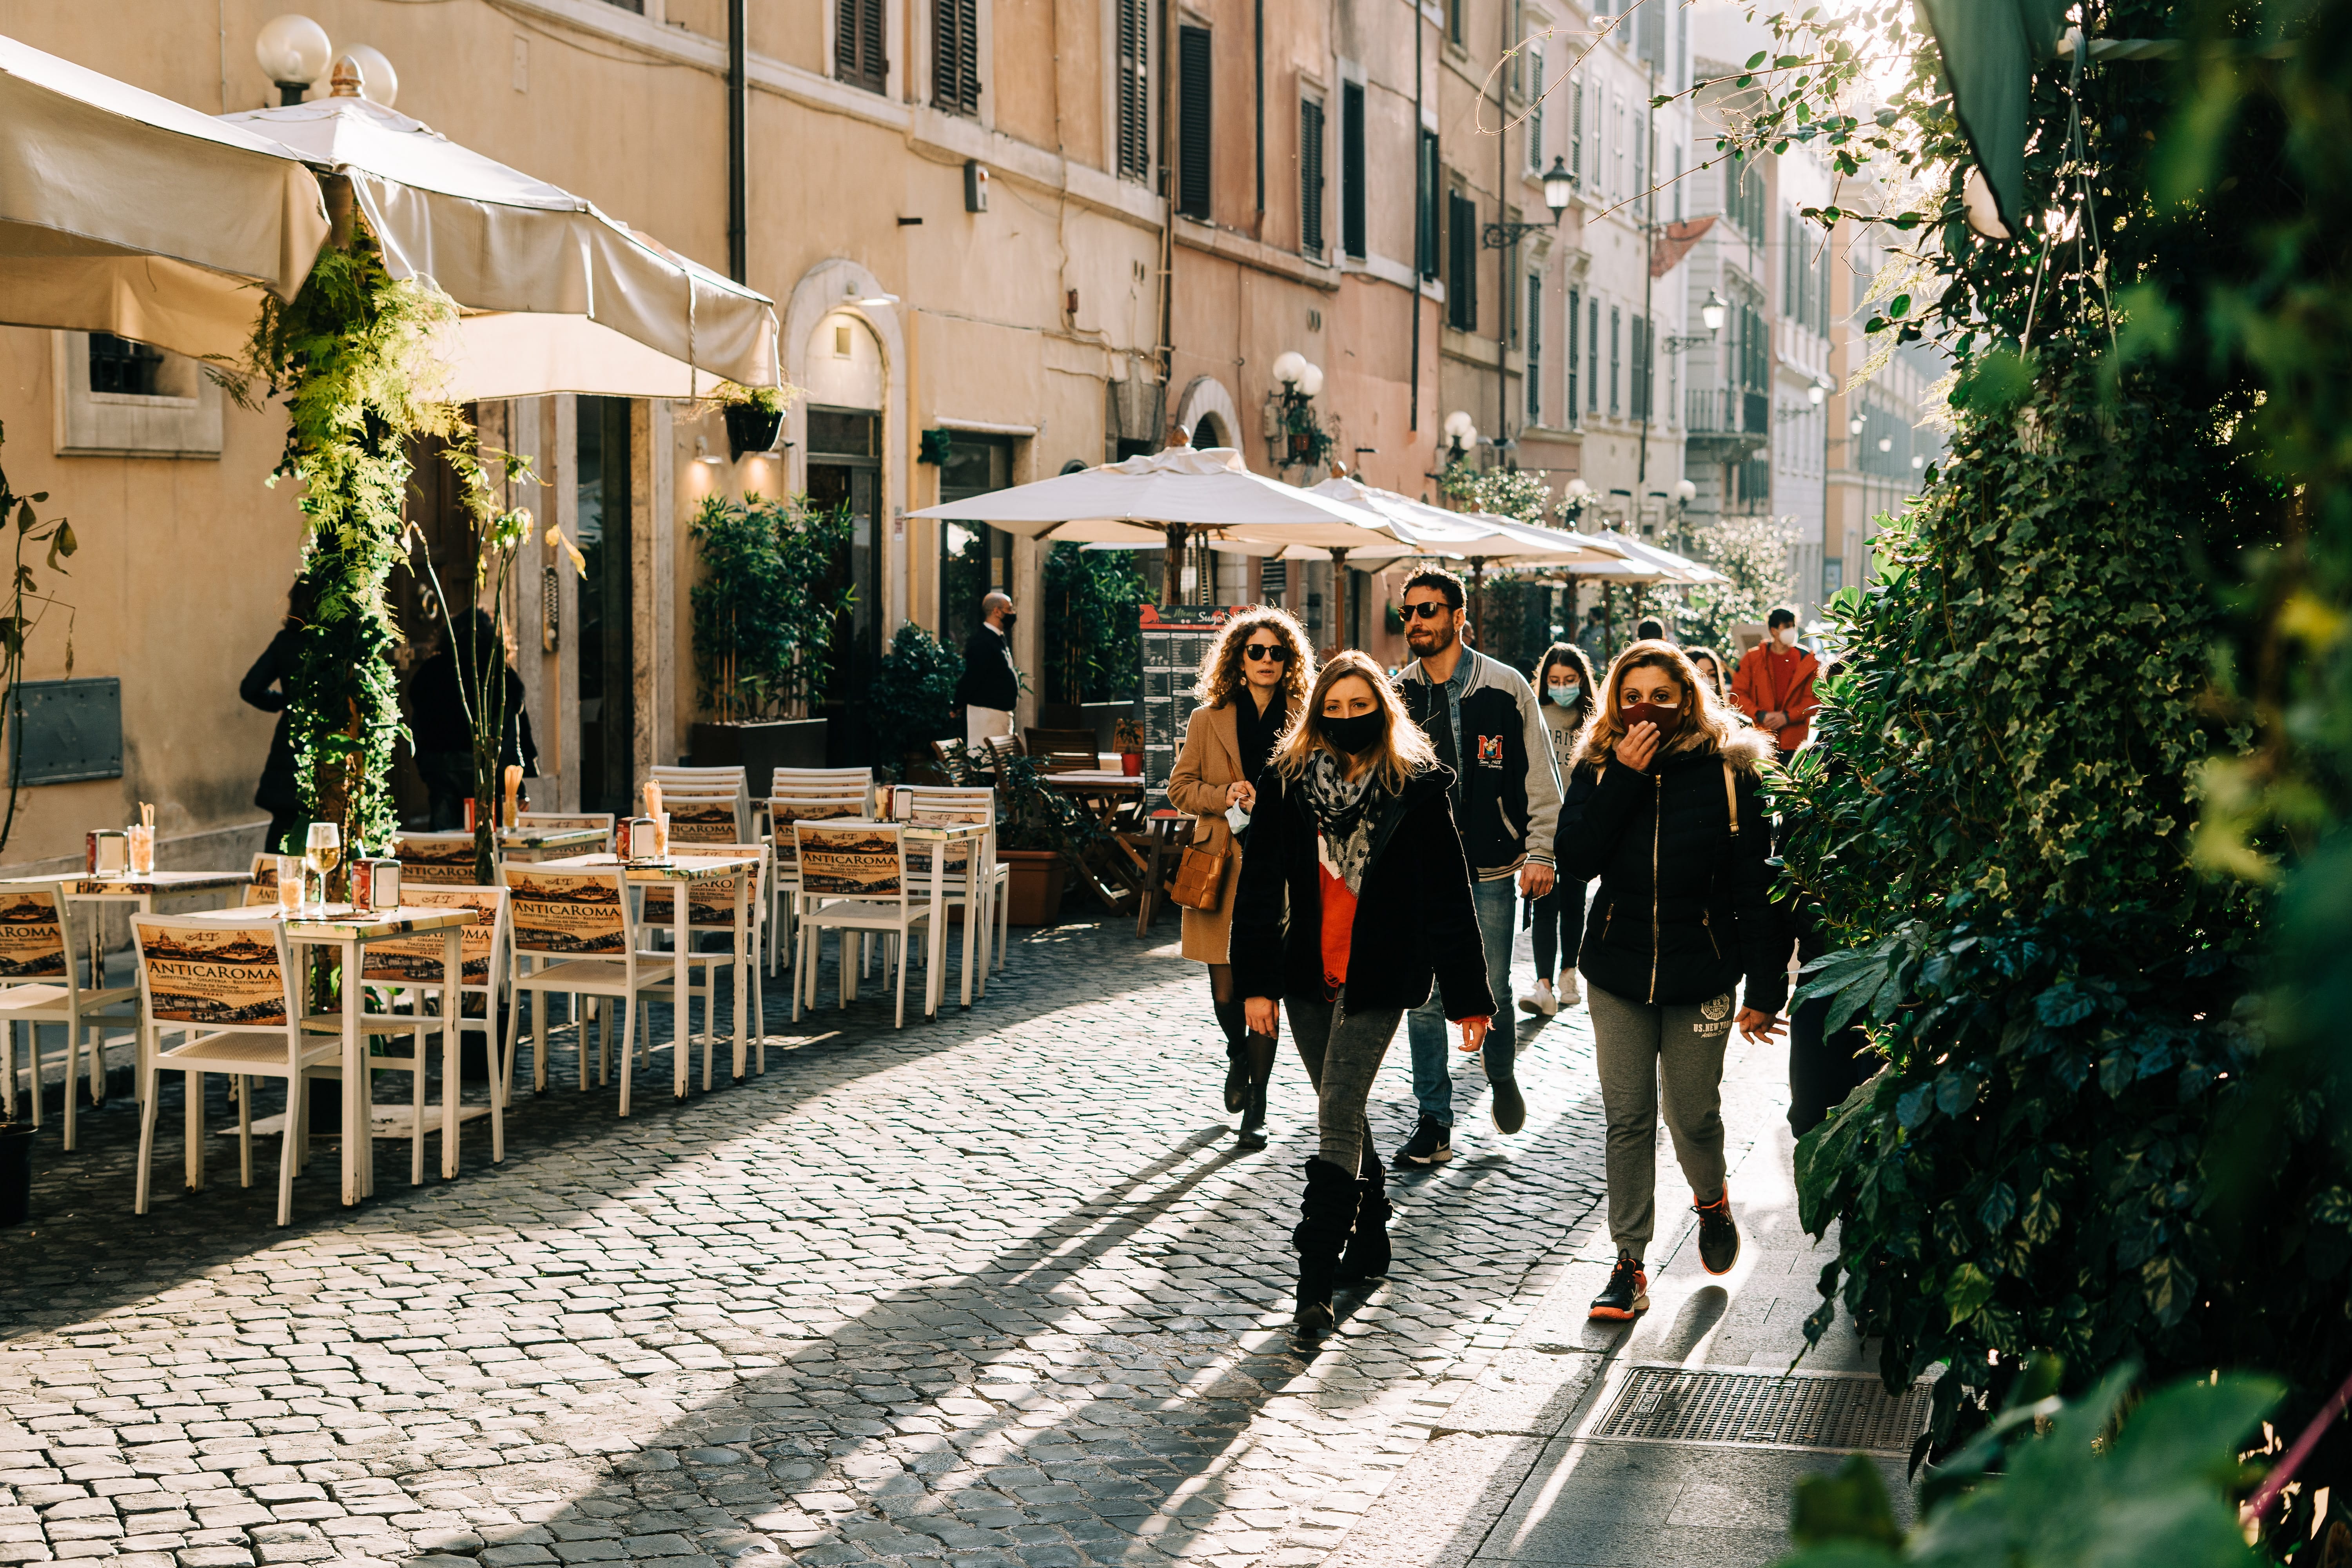 People walking past a cafe in Rome